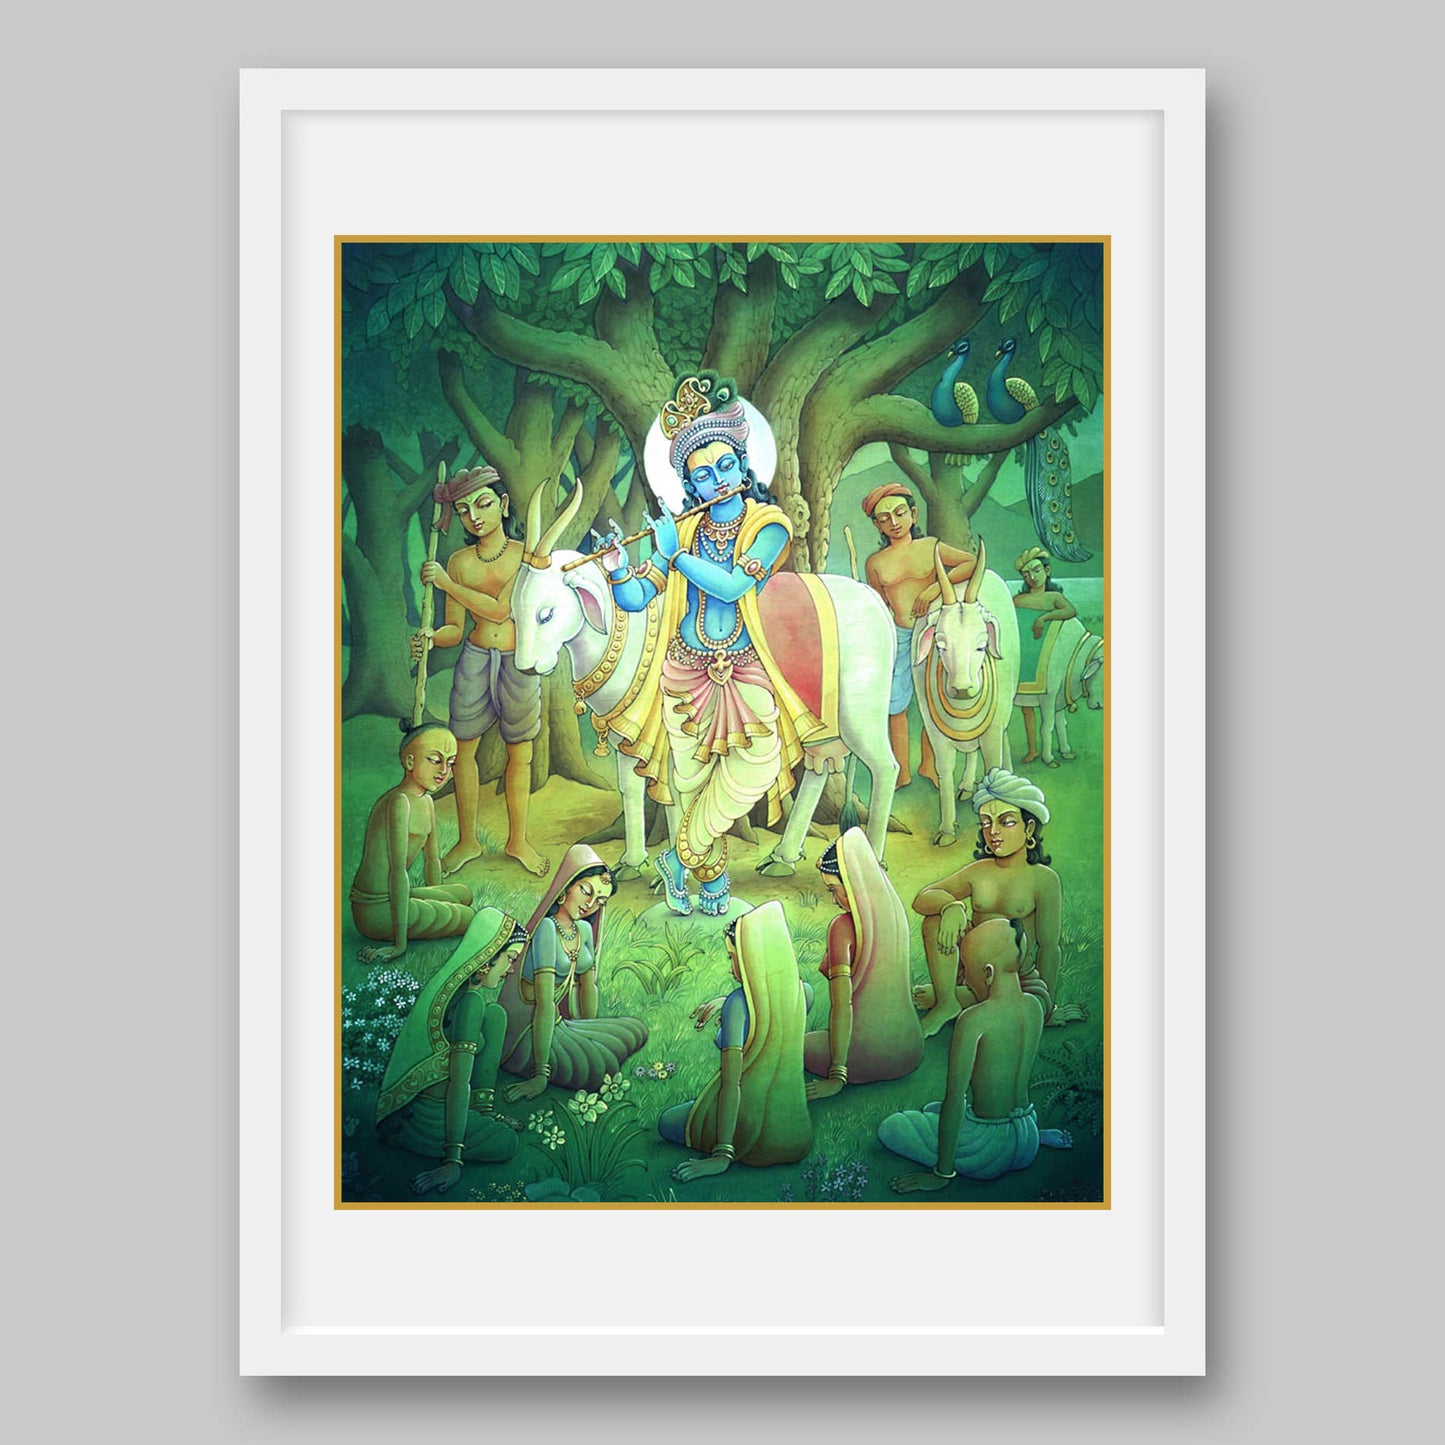 Krishna playing flute – High Quality Print of Artwork by Pieter Weltevrede